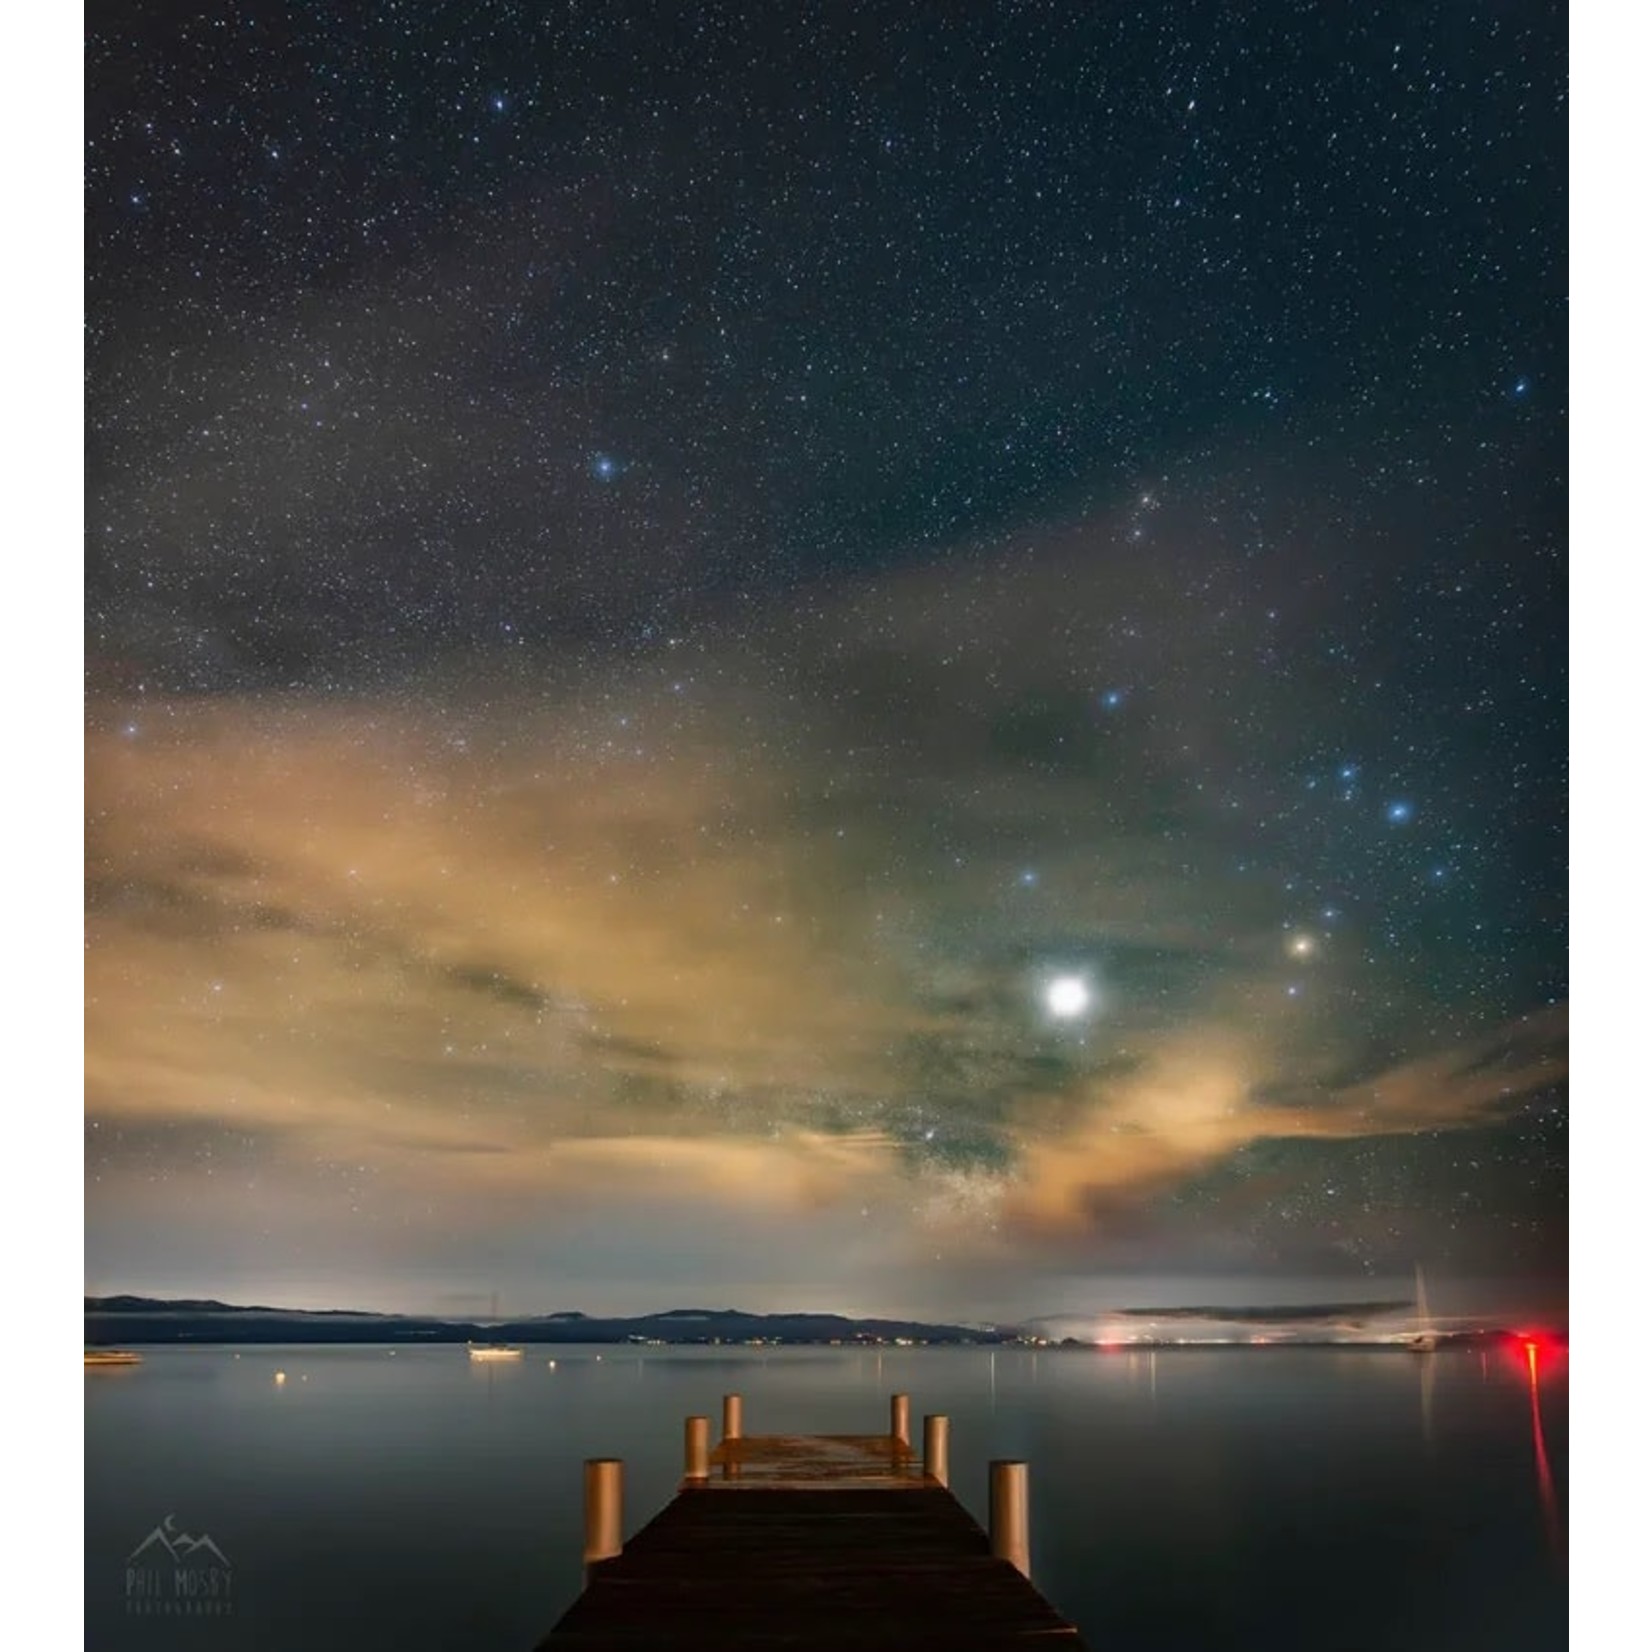 Phil Mosby Photography Postcard - "Space Clouds"